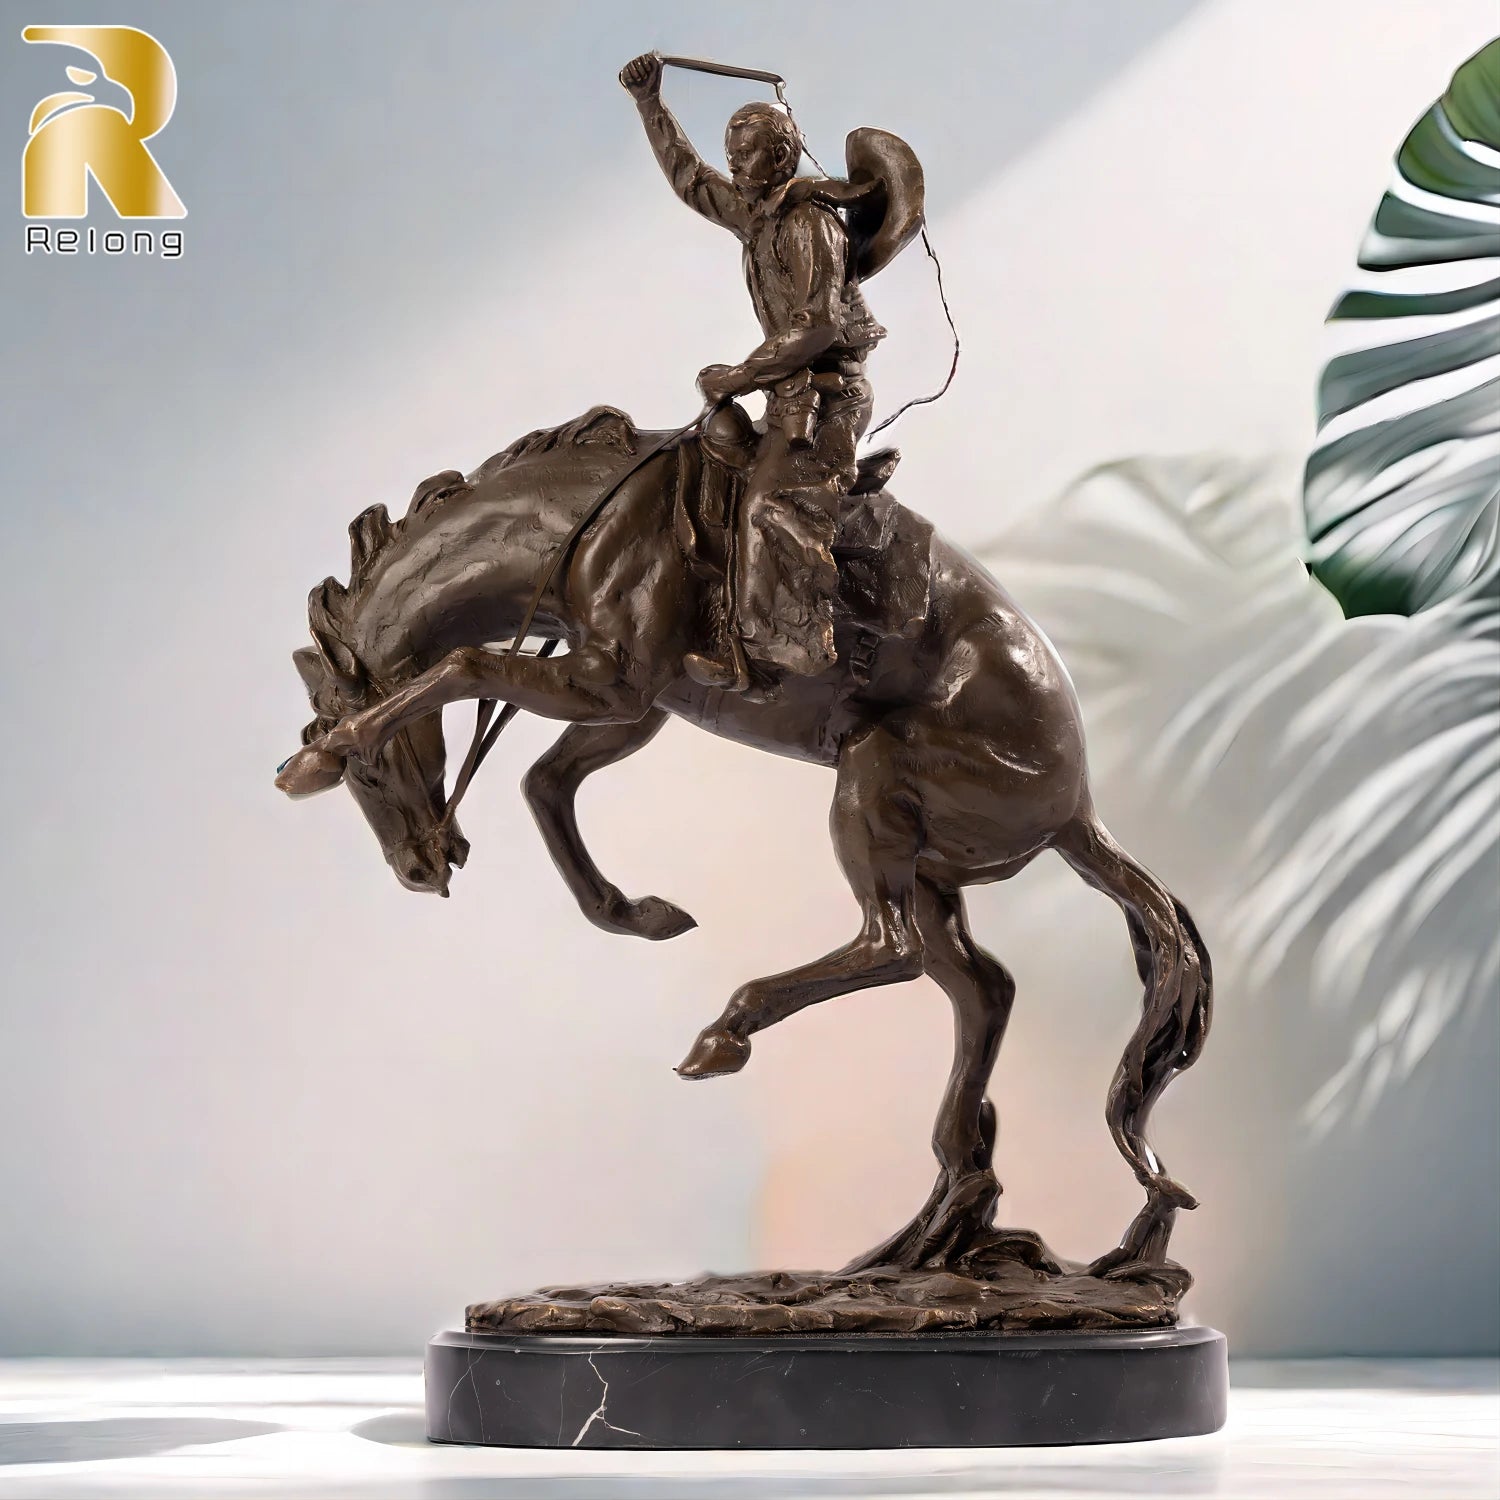 40cm Western Art Bronze Cowboy Ridding Horse Sculpture Rider on Horse Statues Bronze Casting Handcrafts For Home Decor Gifts